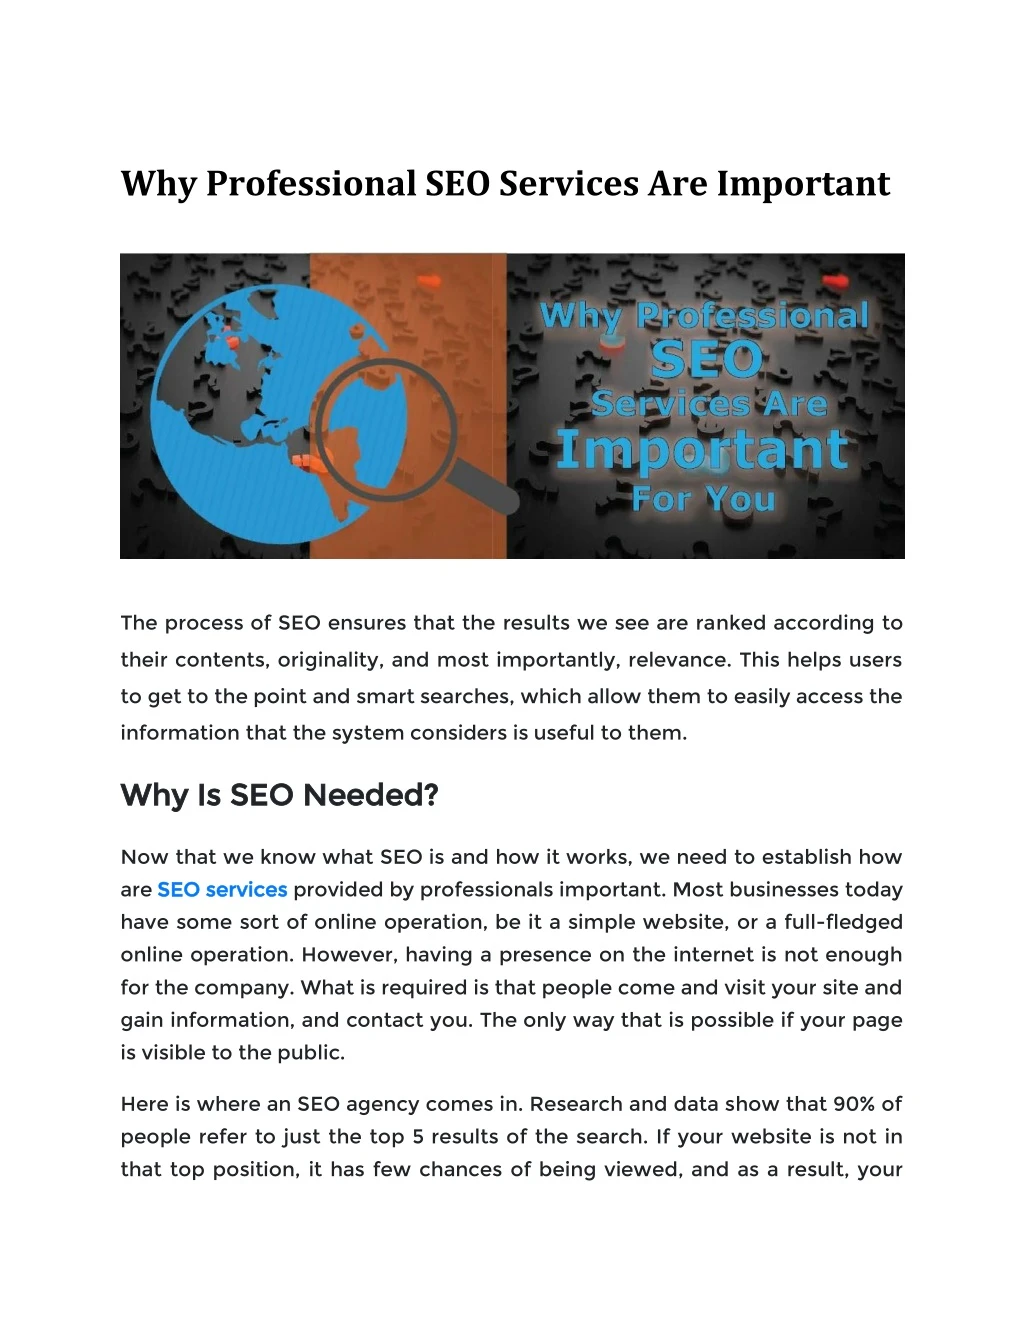 why professional seo services are important